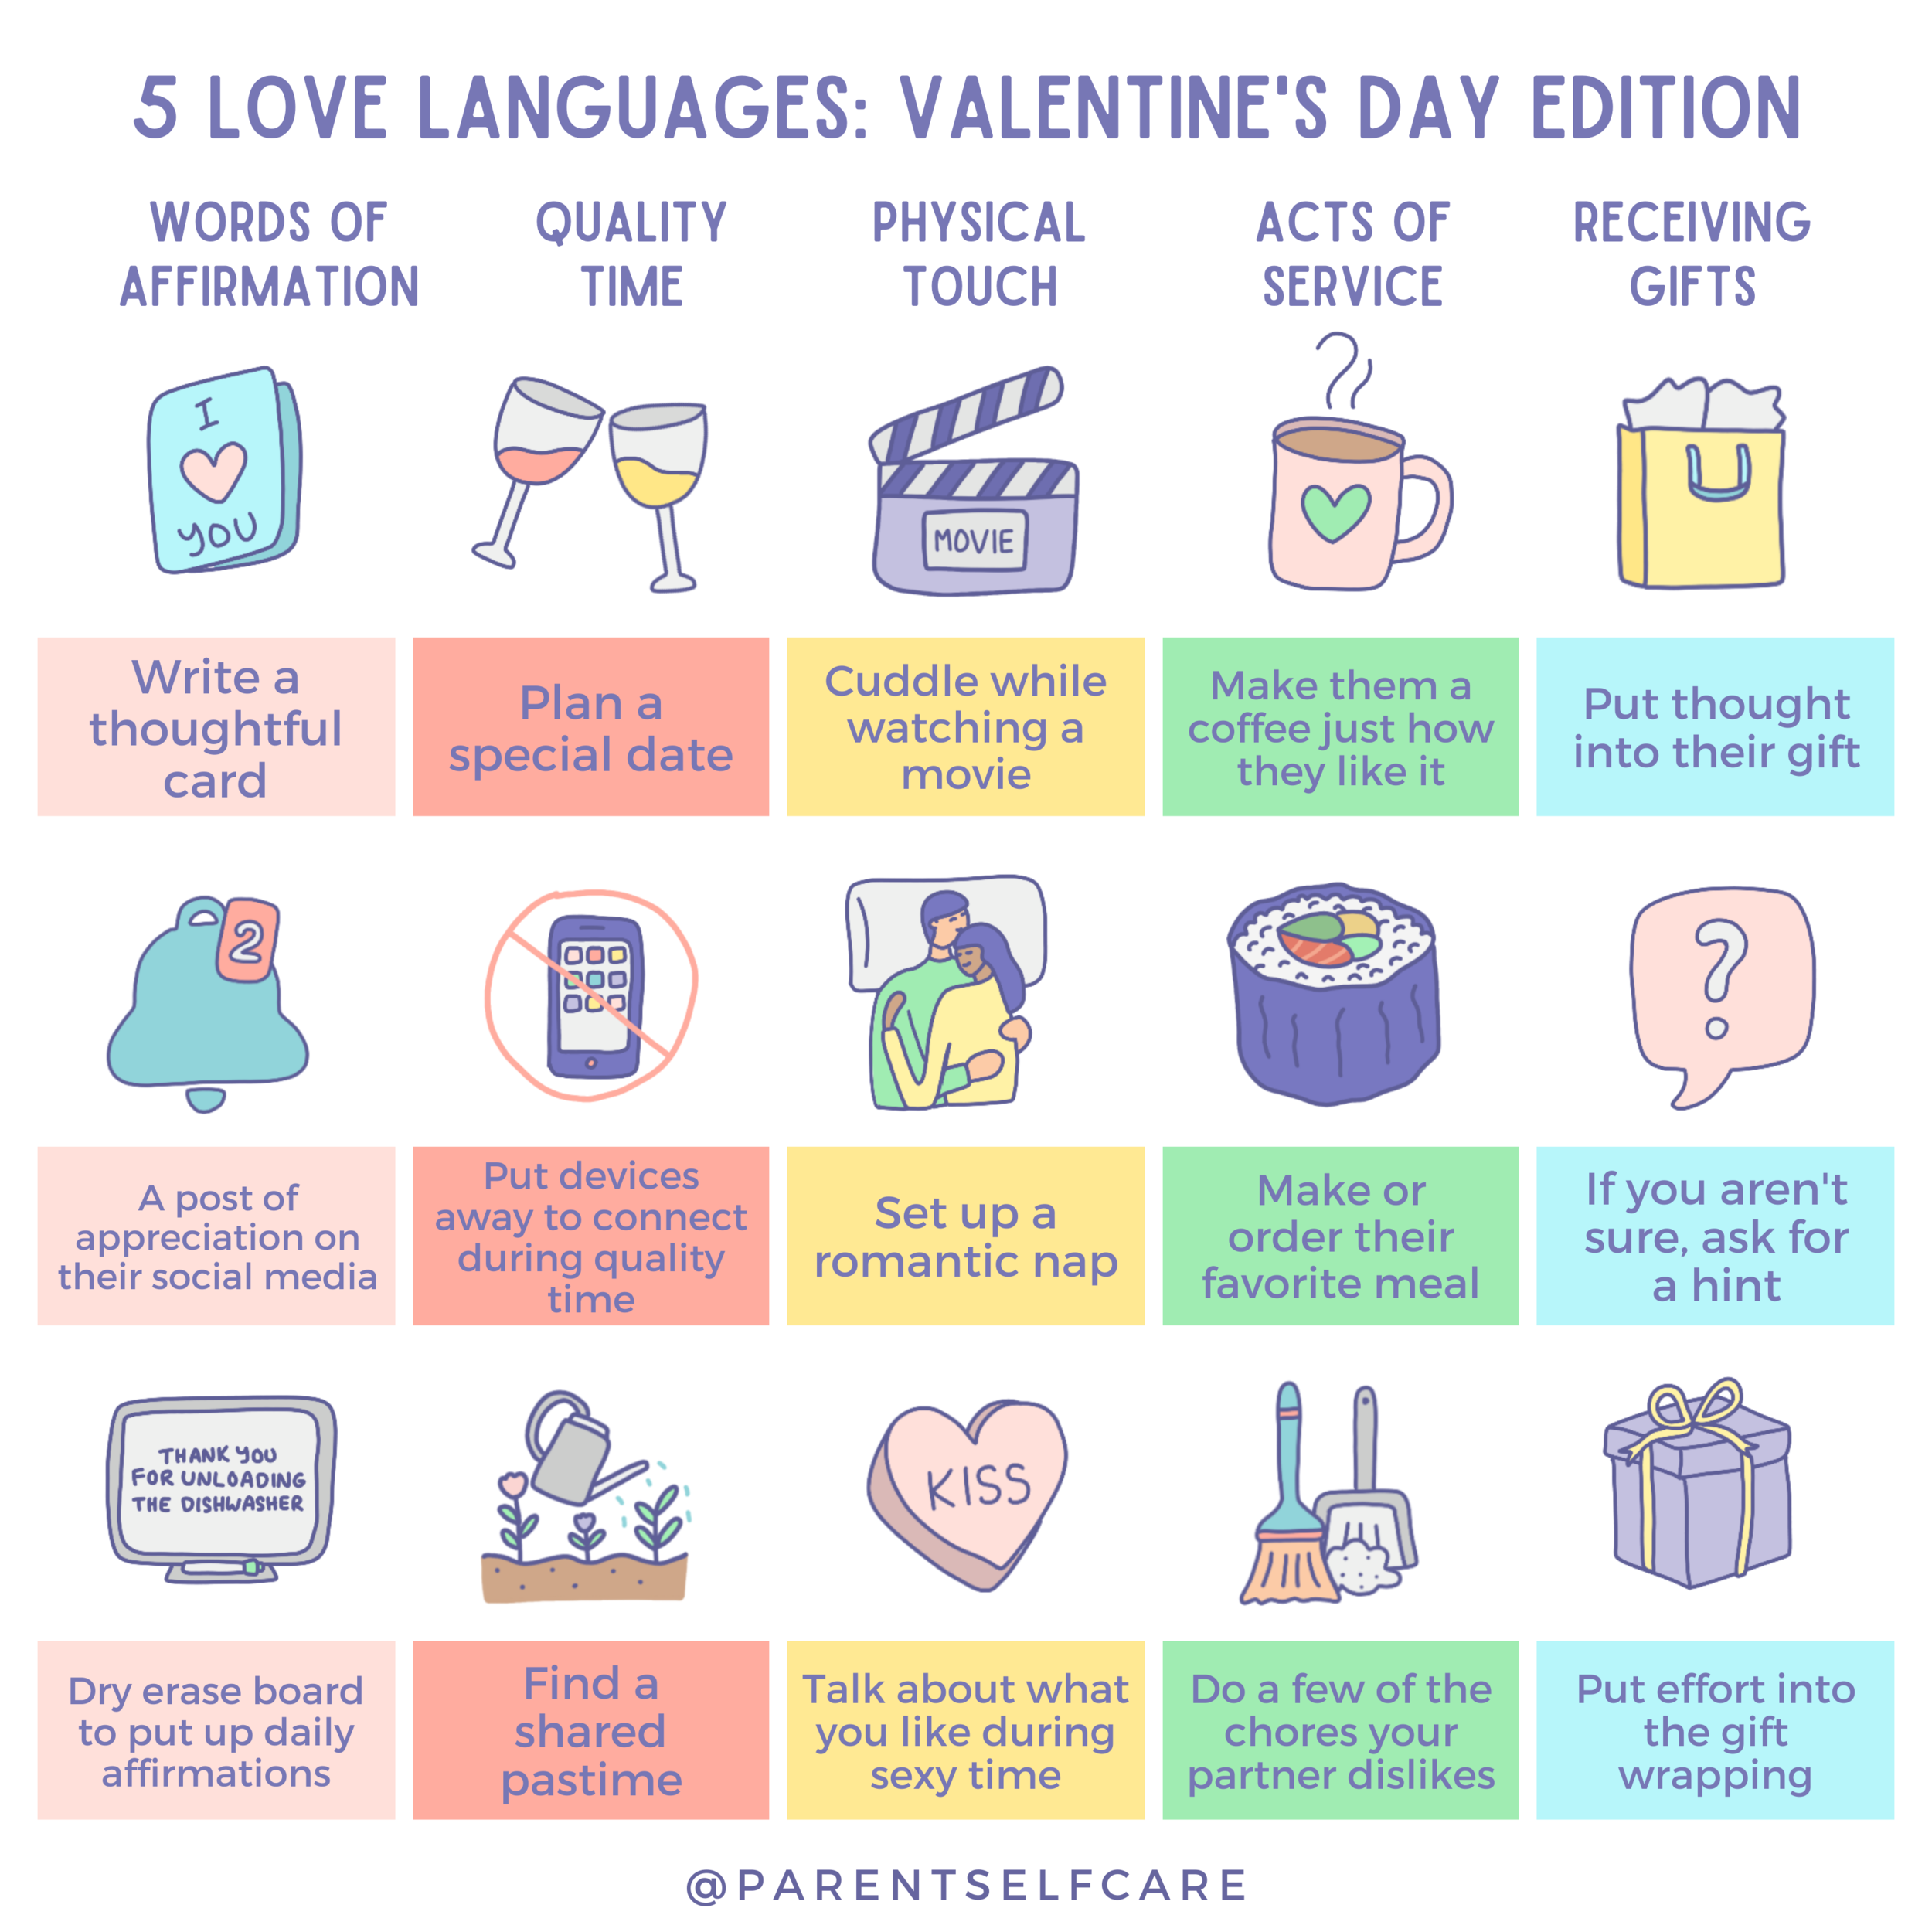 Using The 5 Love Languages for Valentines Day 15 Gift Ideas that Will Speak to Your Partners Heart — Parent Self Care pic